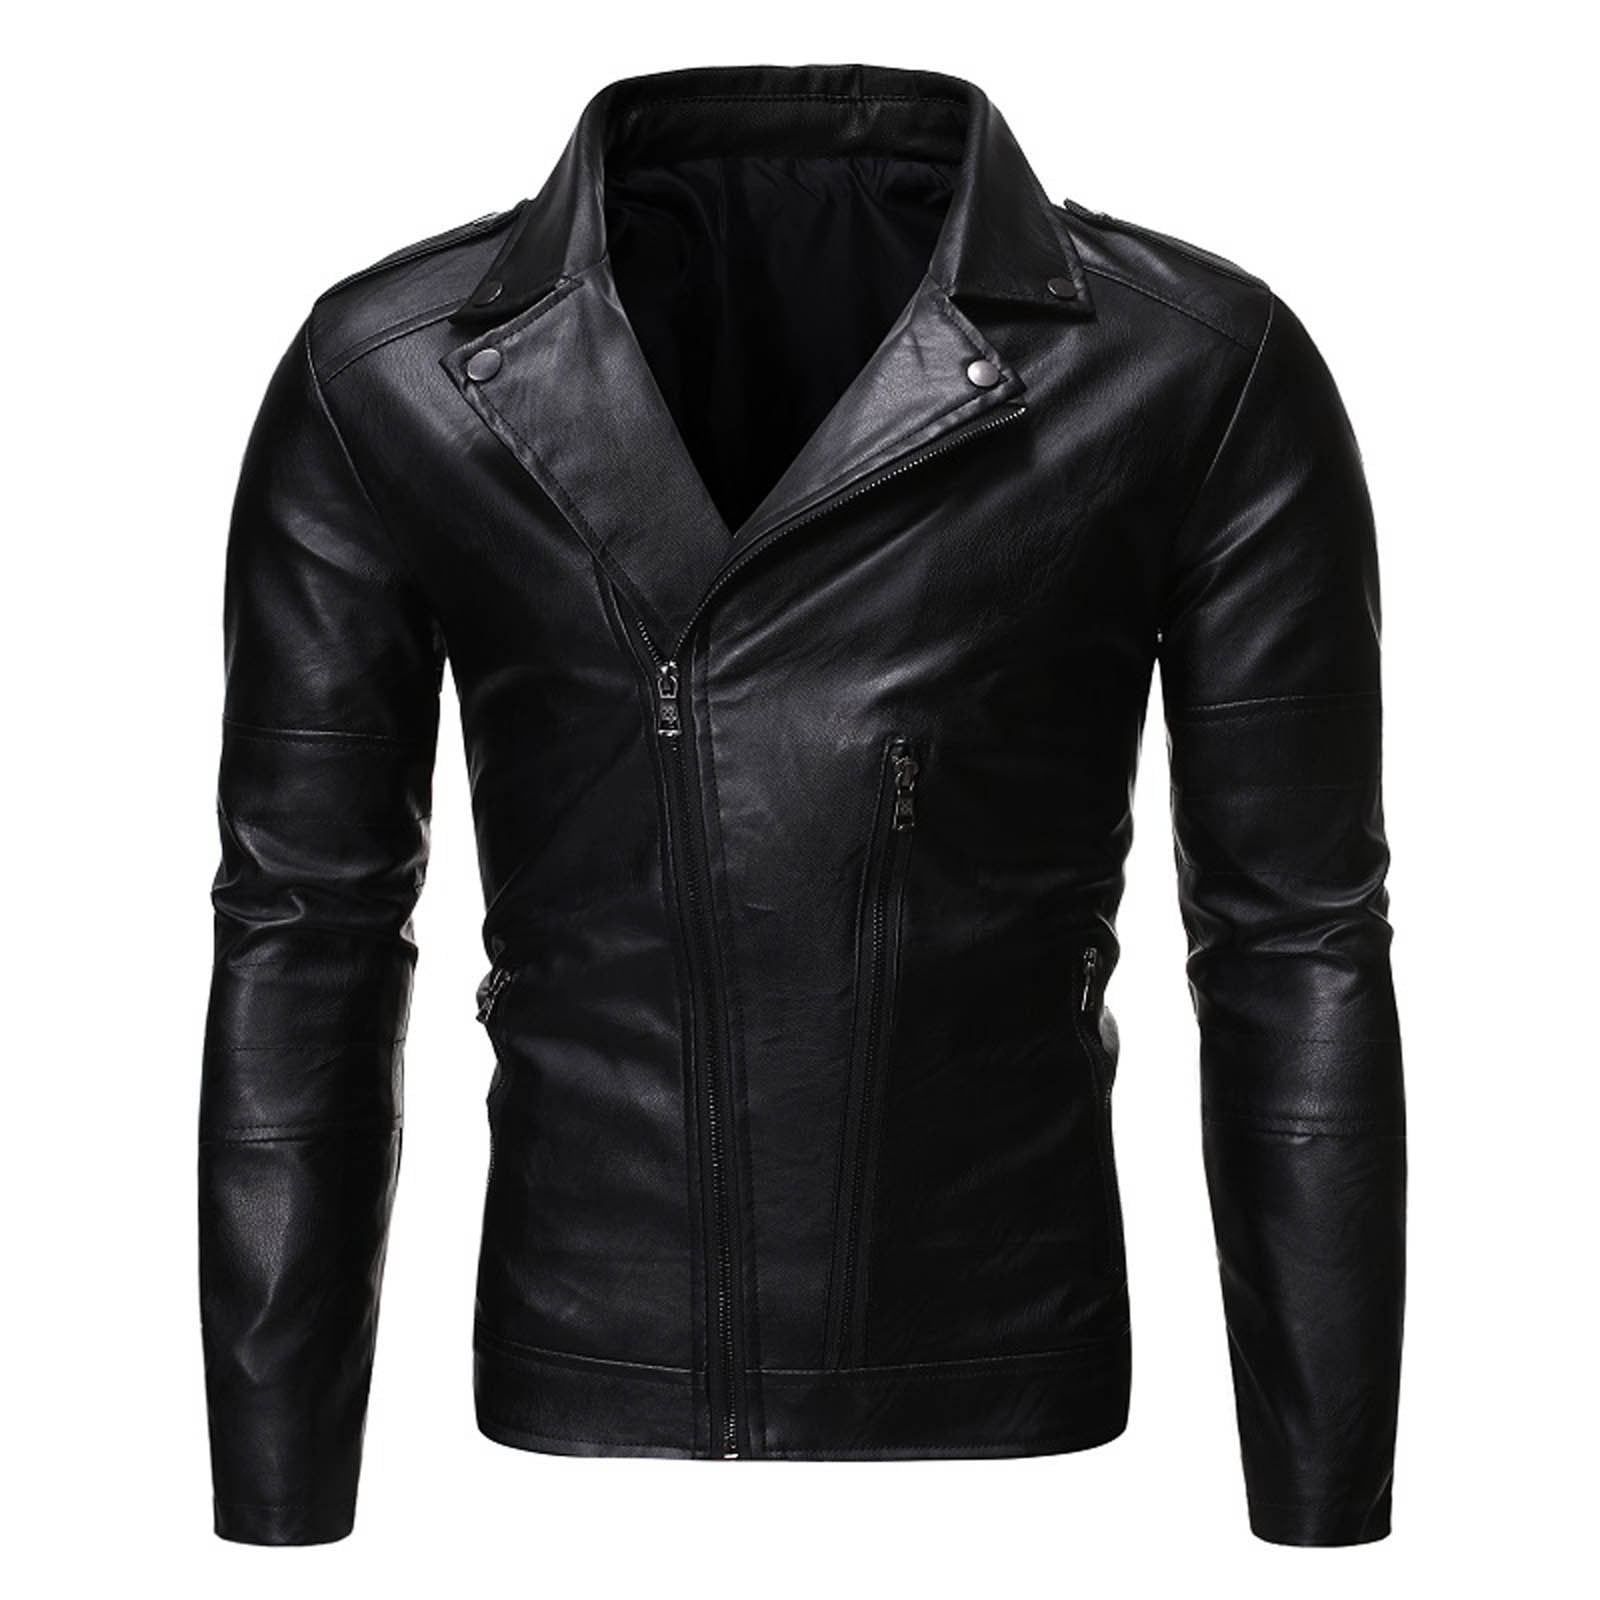 XFLWAM Men's PU Leather Jacket Causal Belted Faux Leather Motorcycle ...